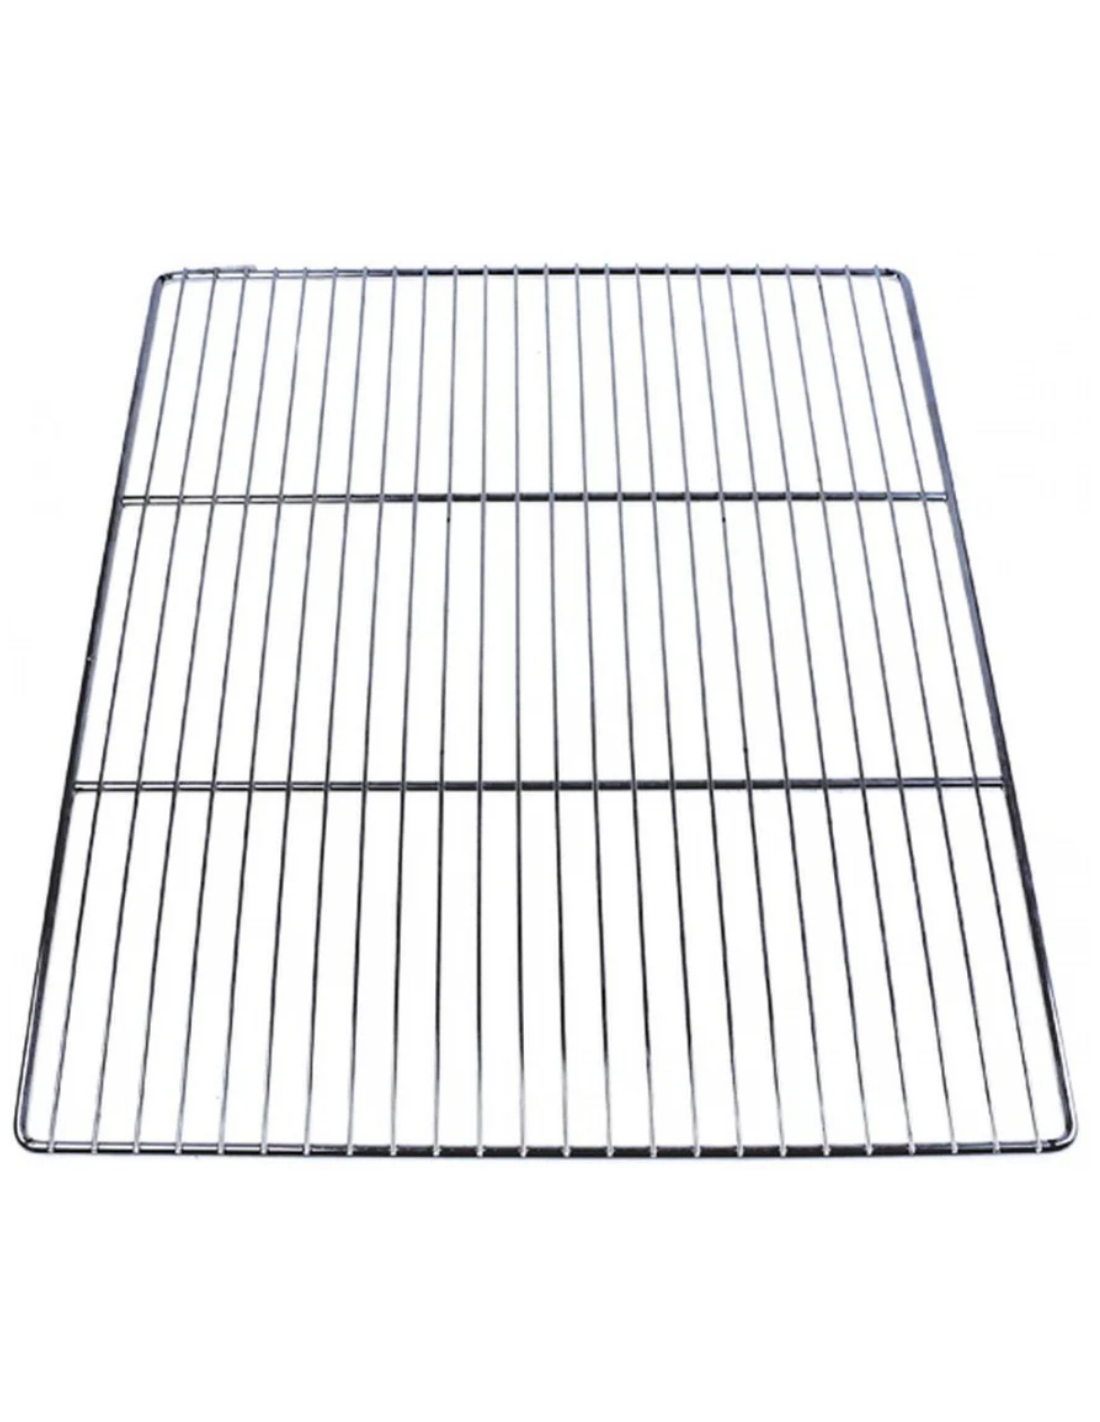 Grid - Stainless steel - Dimensions GN 2/1